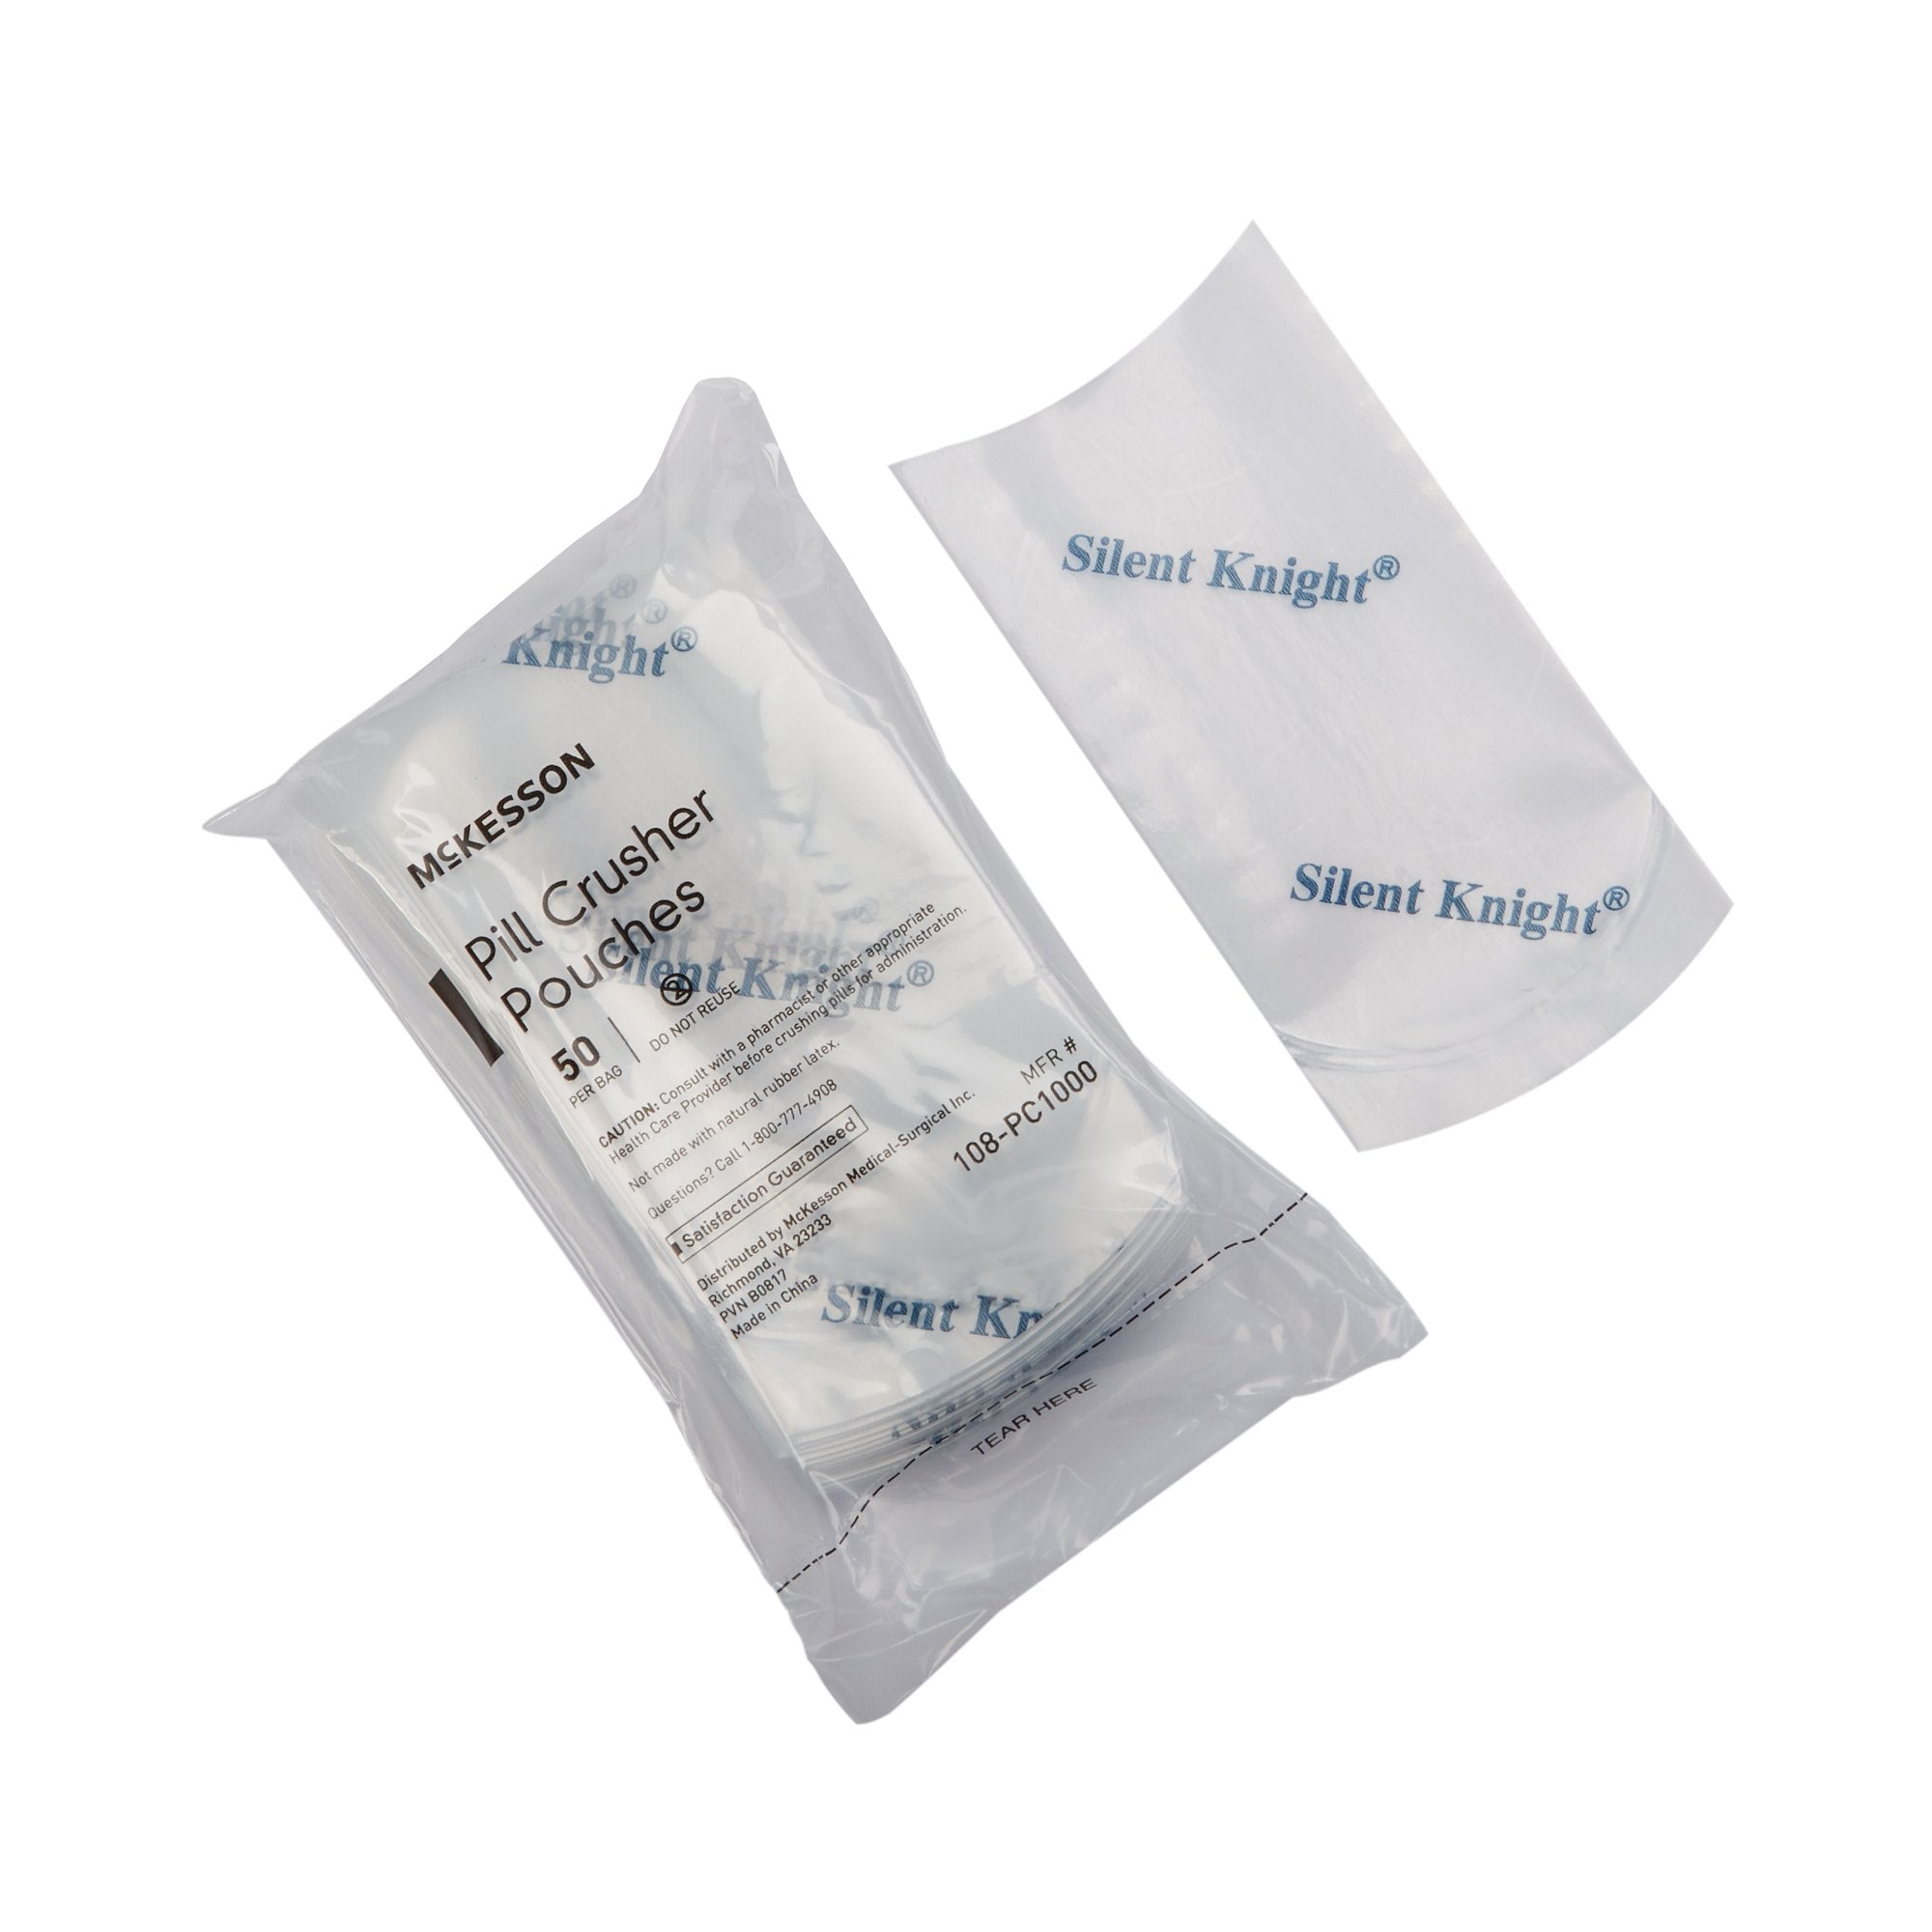 McKesson Silent Knight Pill Crusher Pouches - 160 Pack, 2x4.5